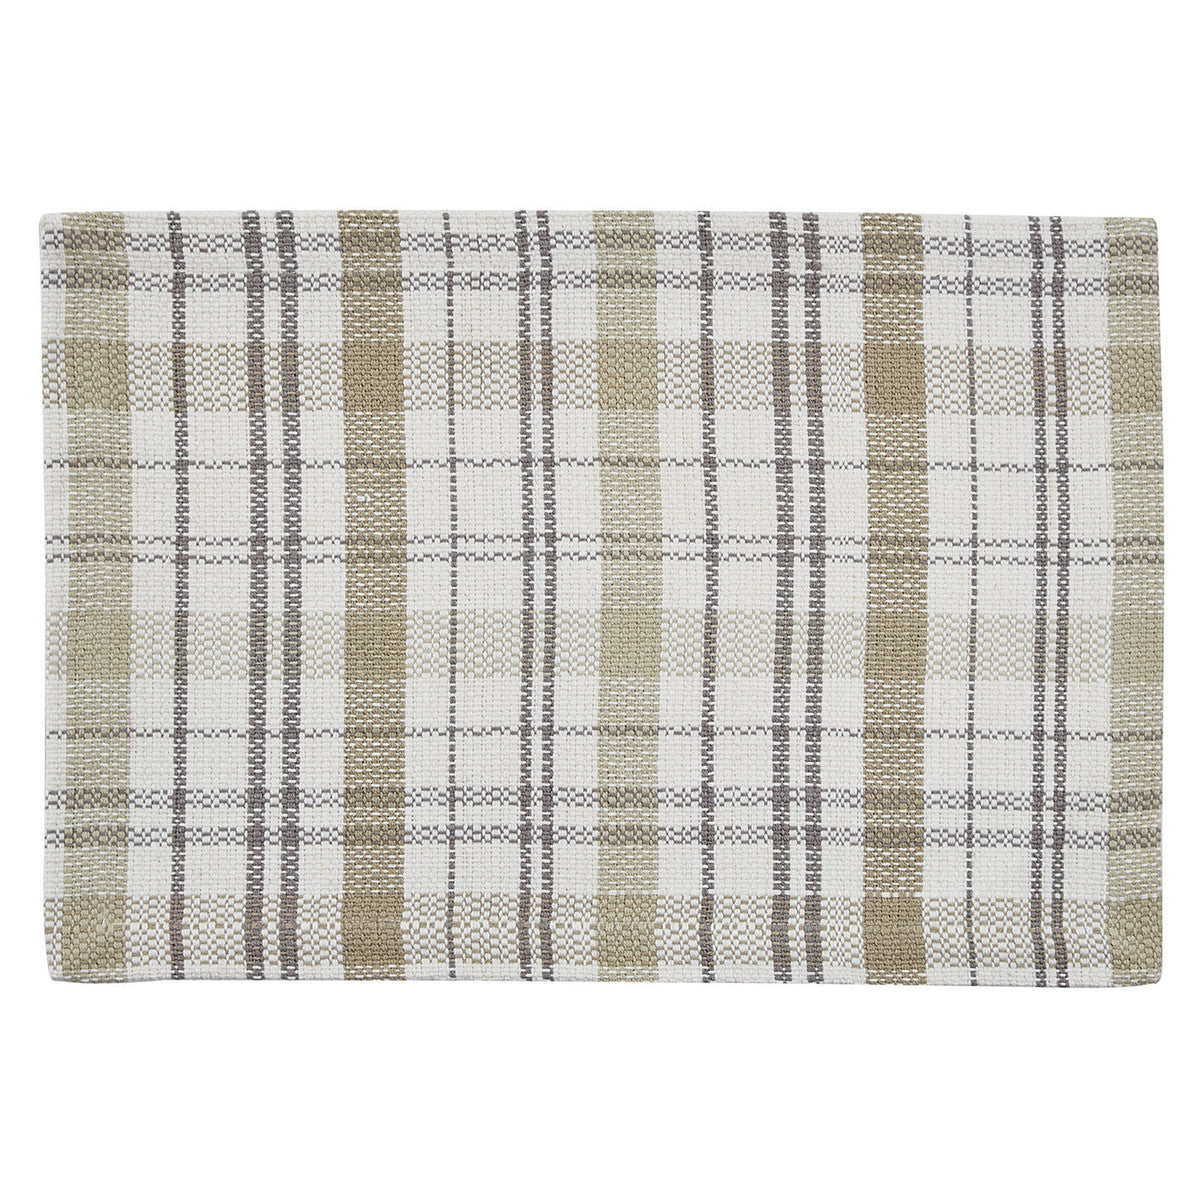 In The Meadow Placemats - Plaid Set Of 6 Park Designs